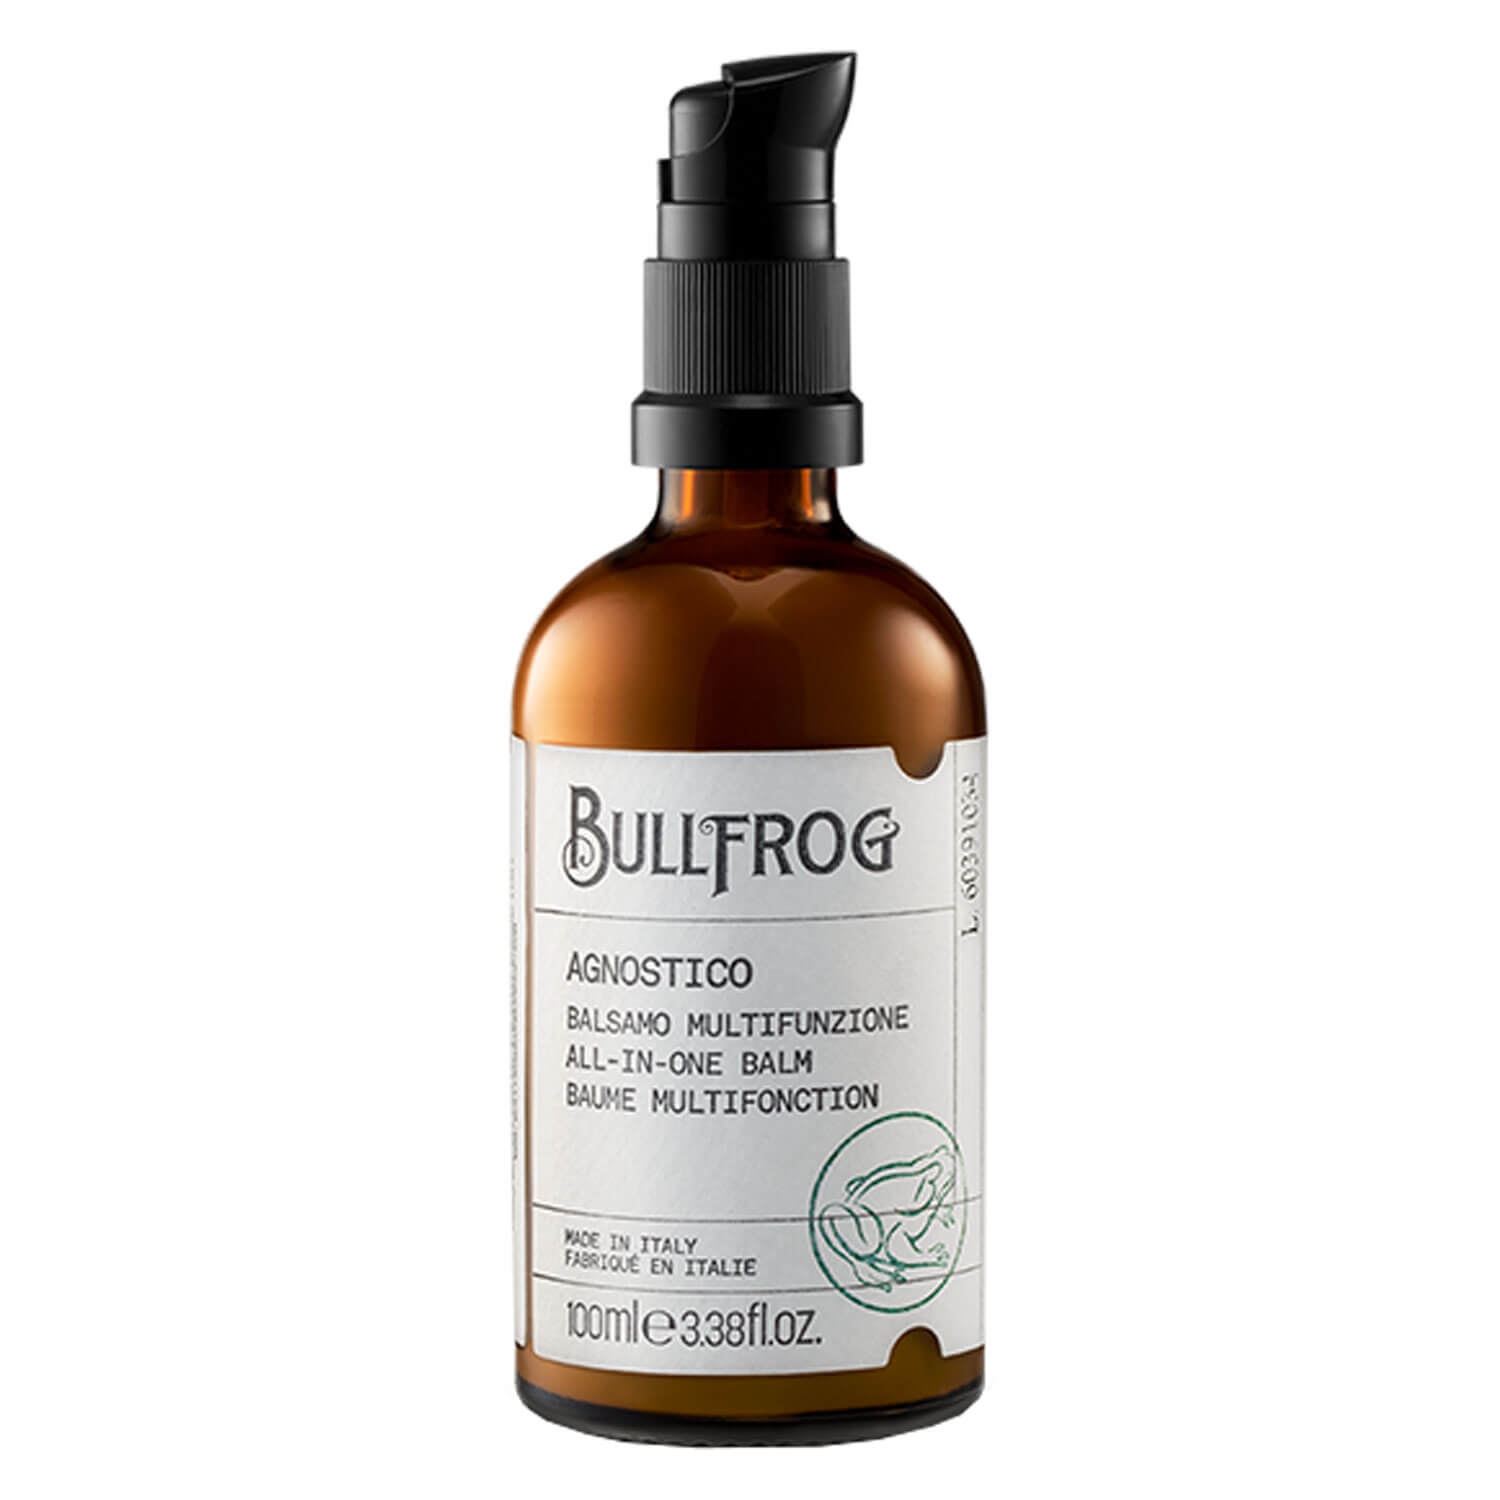 Product image from BULLFROG - Agnostico All-in-One Balm